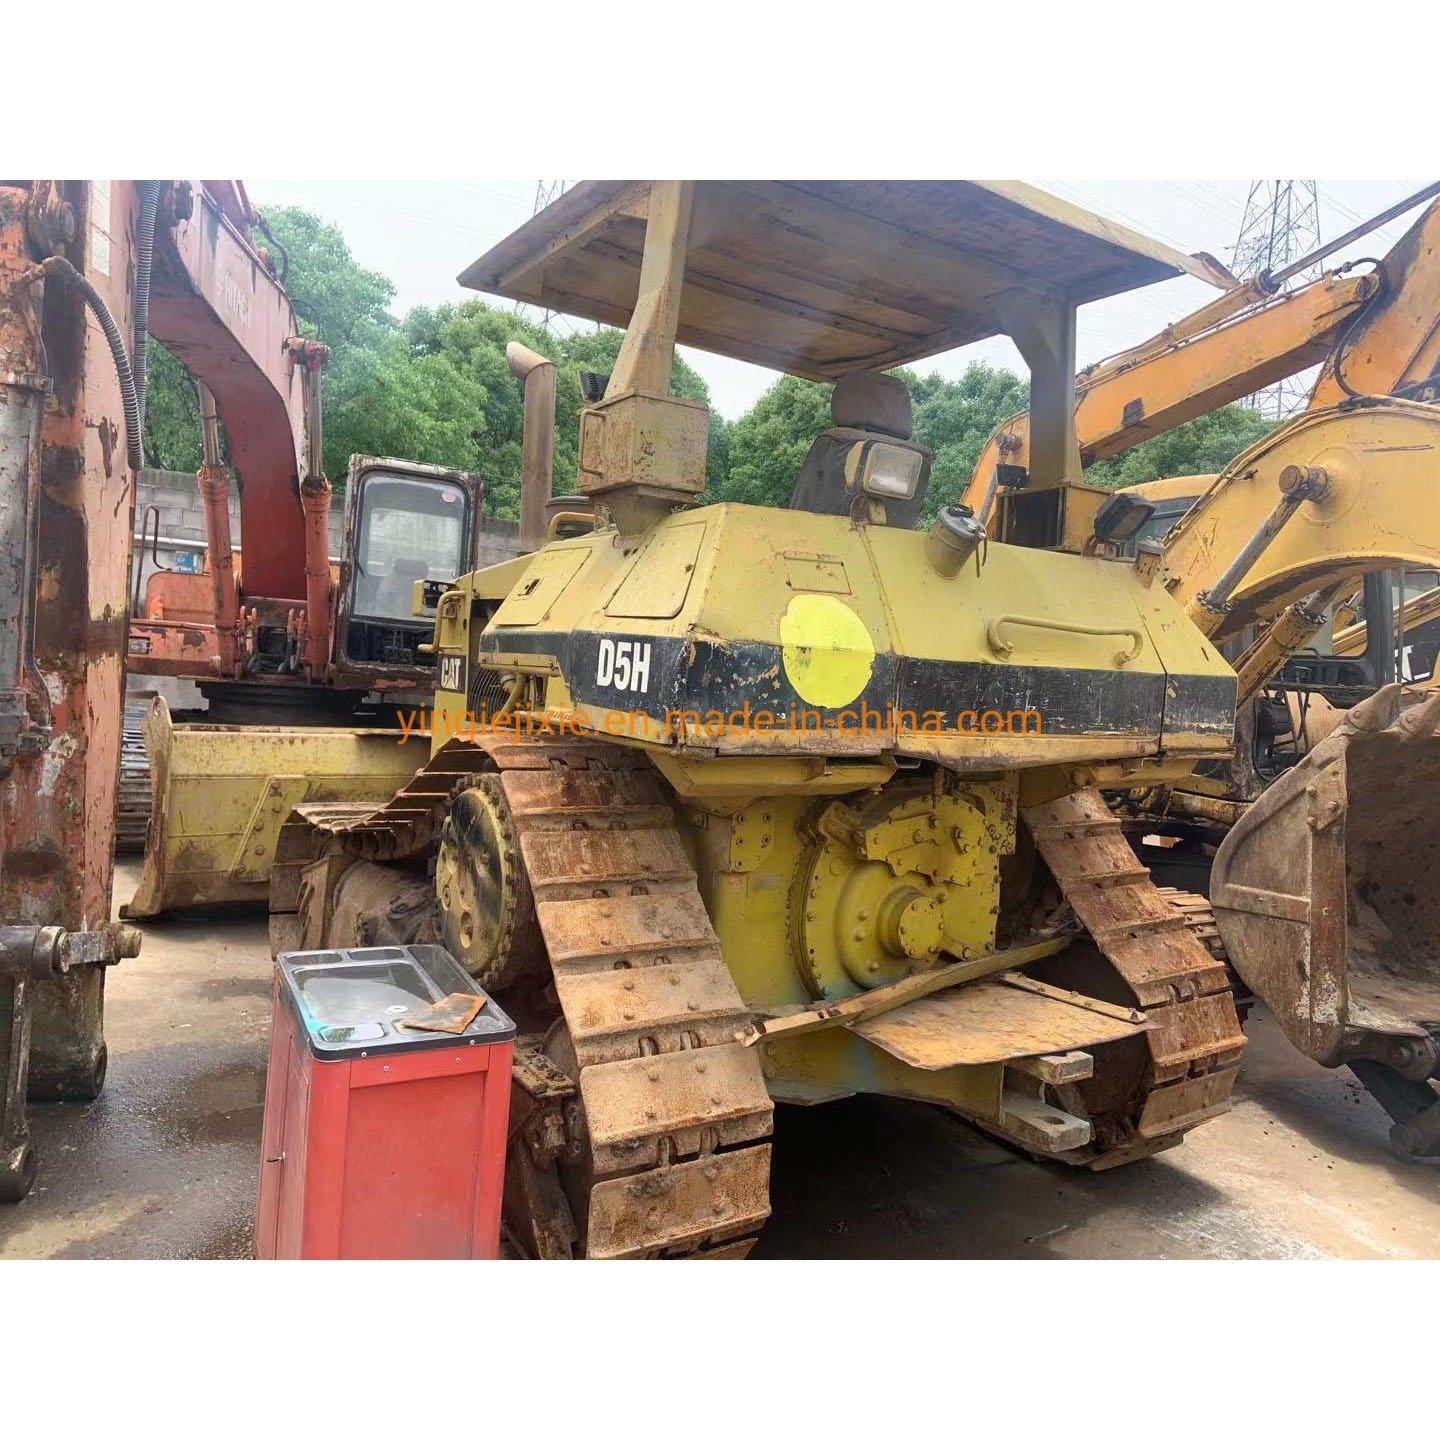 Used Caterpillar D5h Bulldozer with Wide Track Shoe for Sale